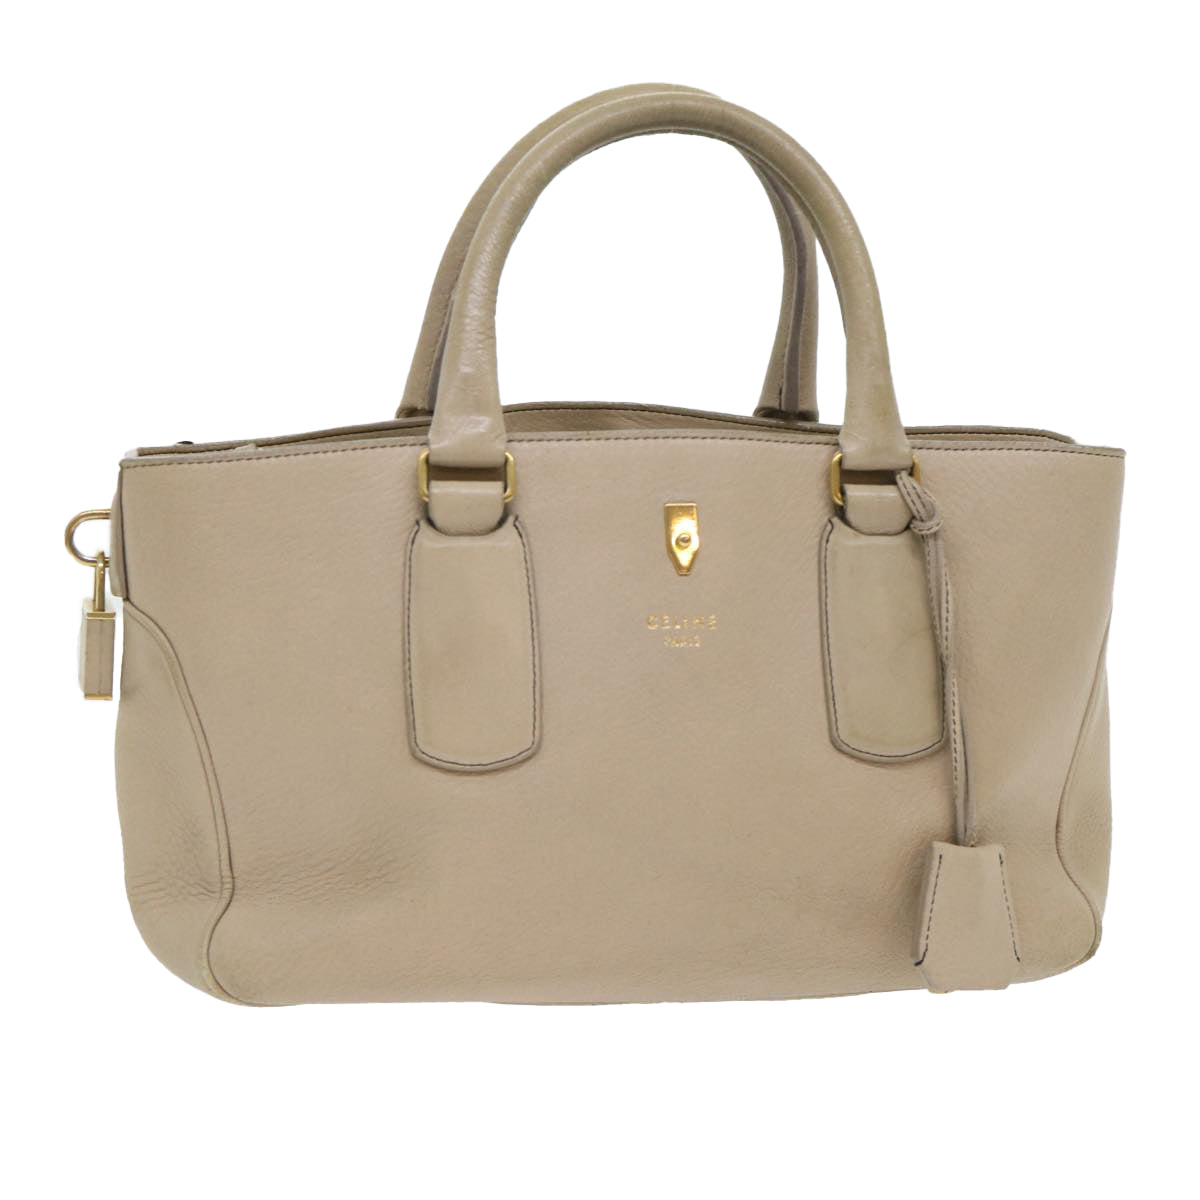 CELINE Hand Bag Leather Beige Auth bs8421